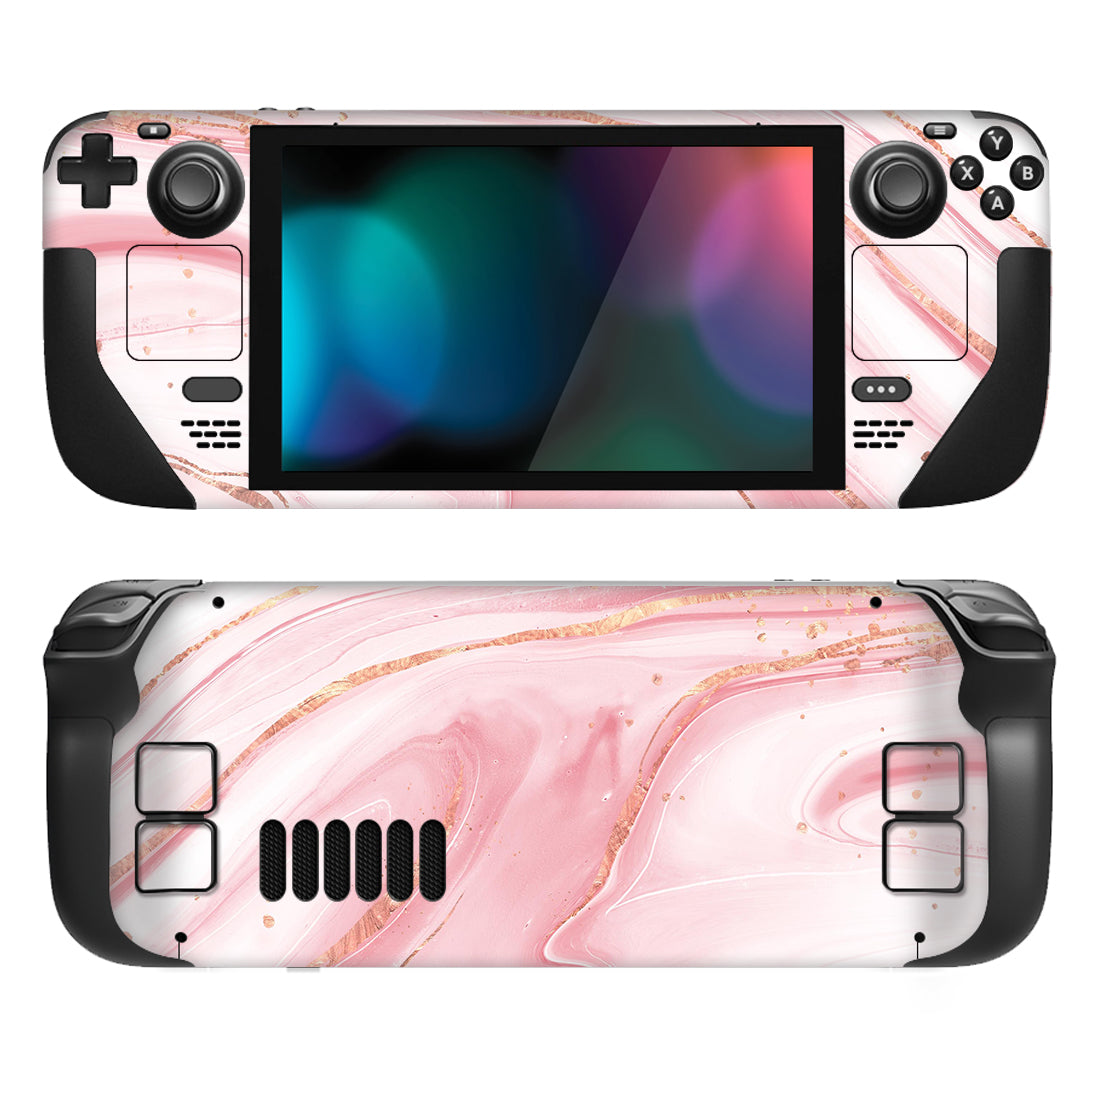 PlayVital Full Set Protective Skin Decal for Steam Deck, Custom Stickers Vinyl Cover for Steam Deck Handheld Gaming PC - Pink Gold Marble - SDTM031 playvital